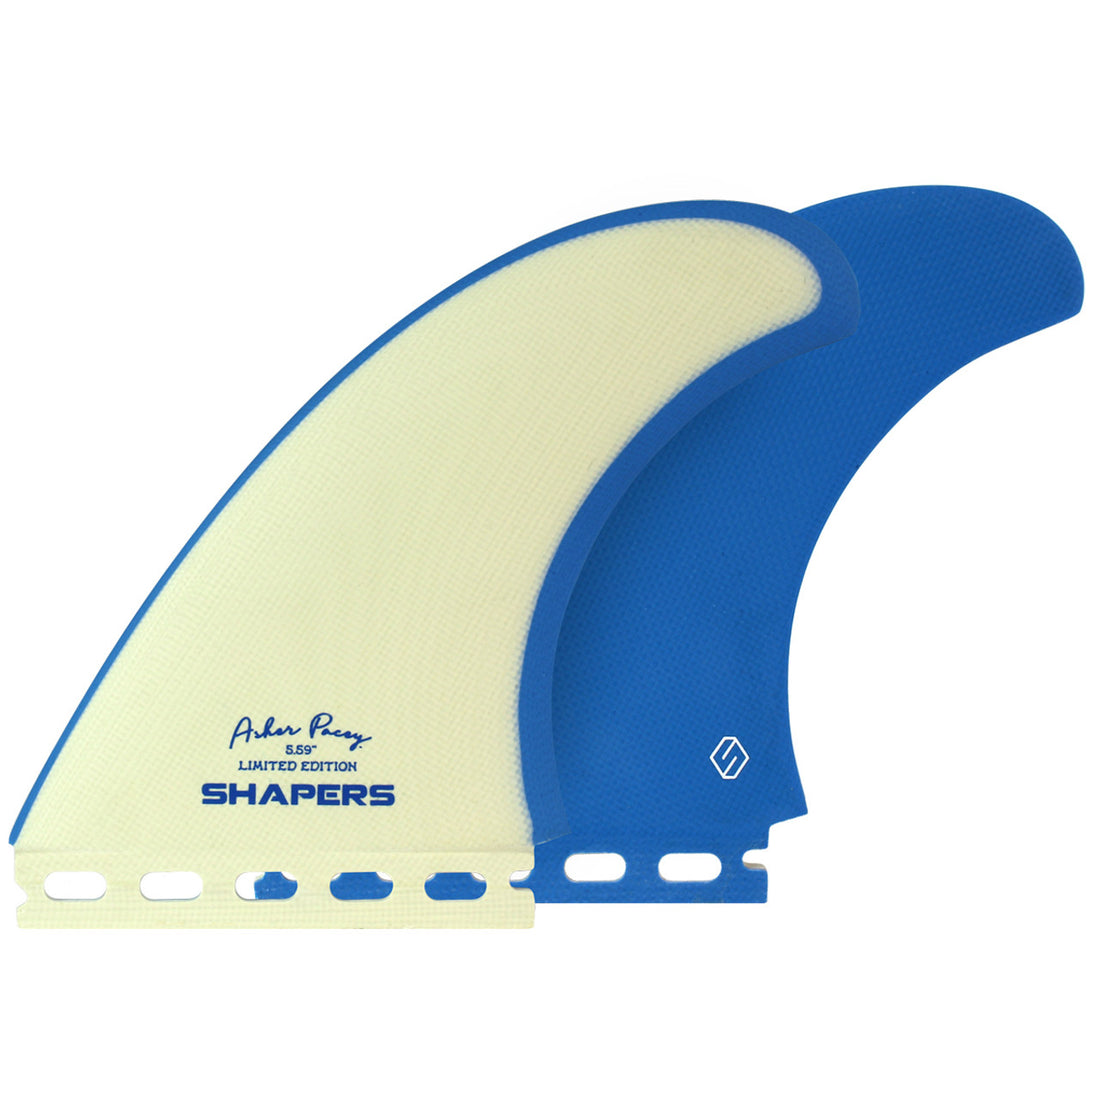 SHAPERS AP 5.59" TWIN FIN WITH STABILSER FIN BLUE WHITE